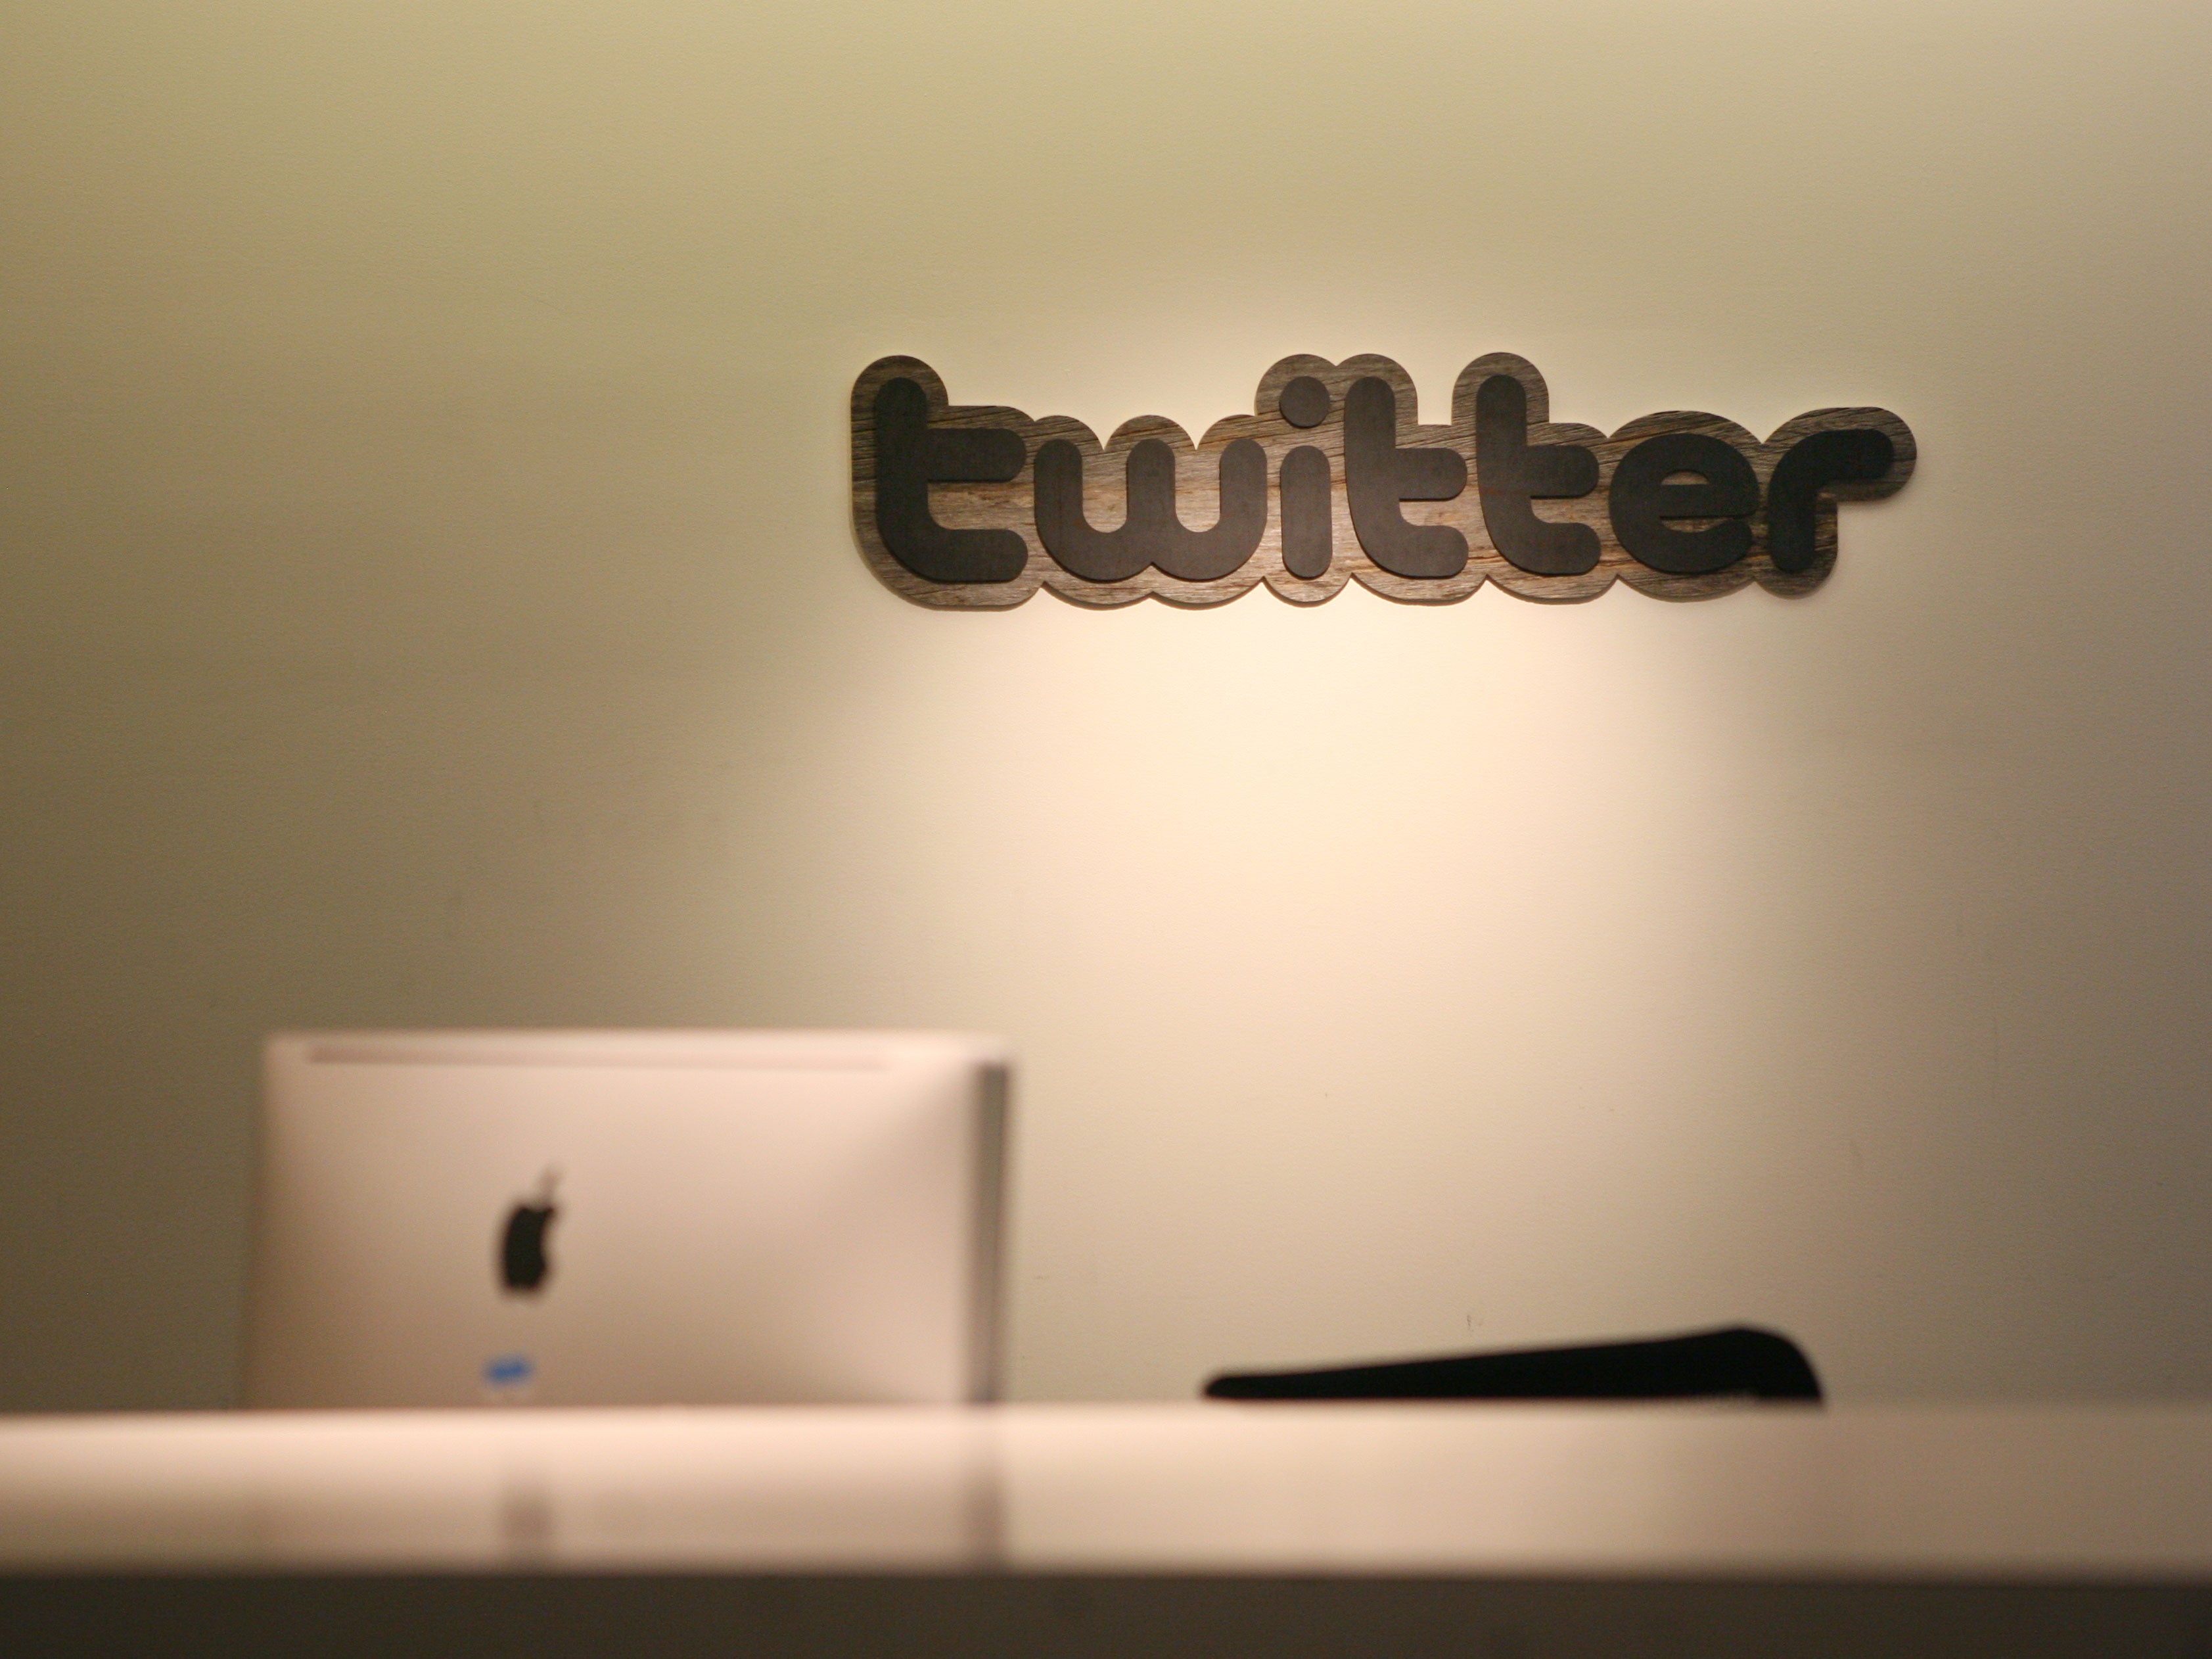 Twitter logo is displayed at the entrance of Twitter headquarters in San Francisco on March 11, 2011 in California